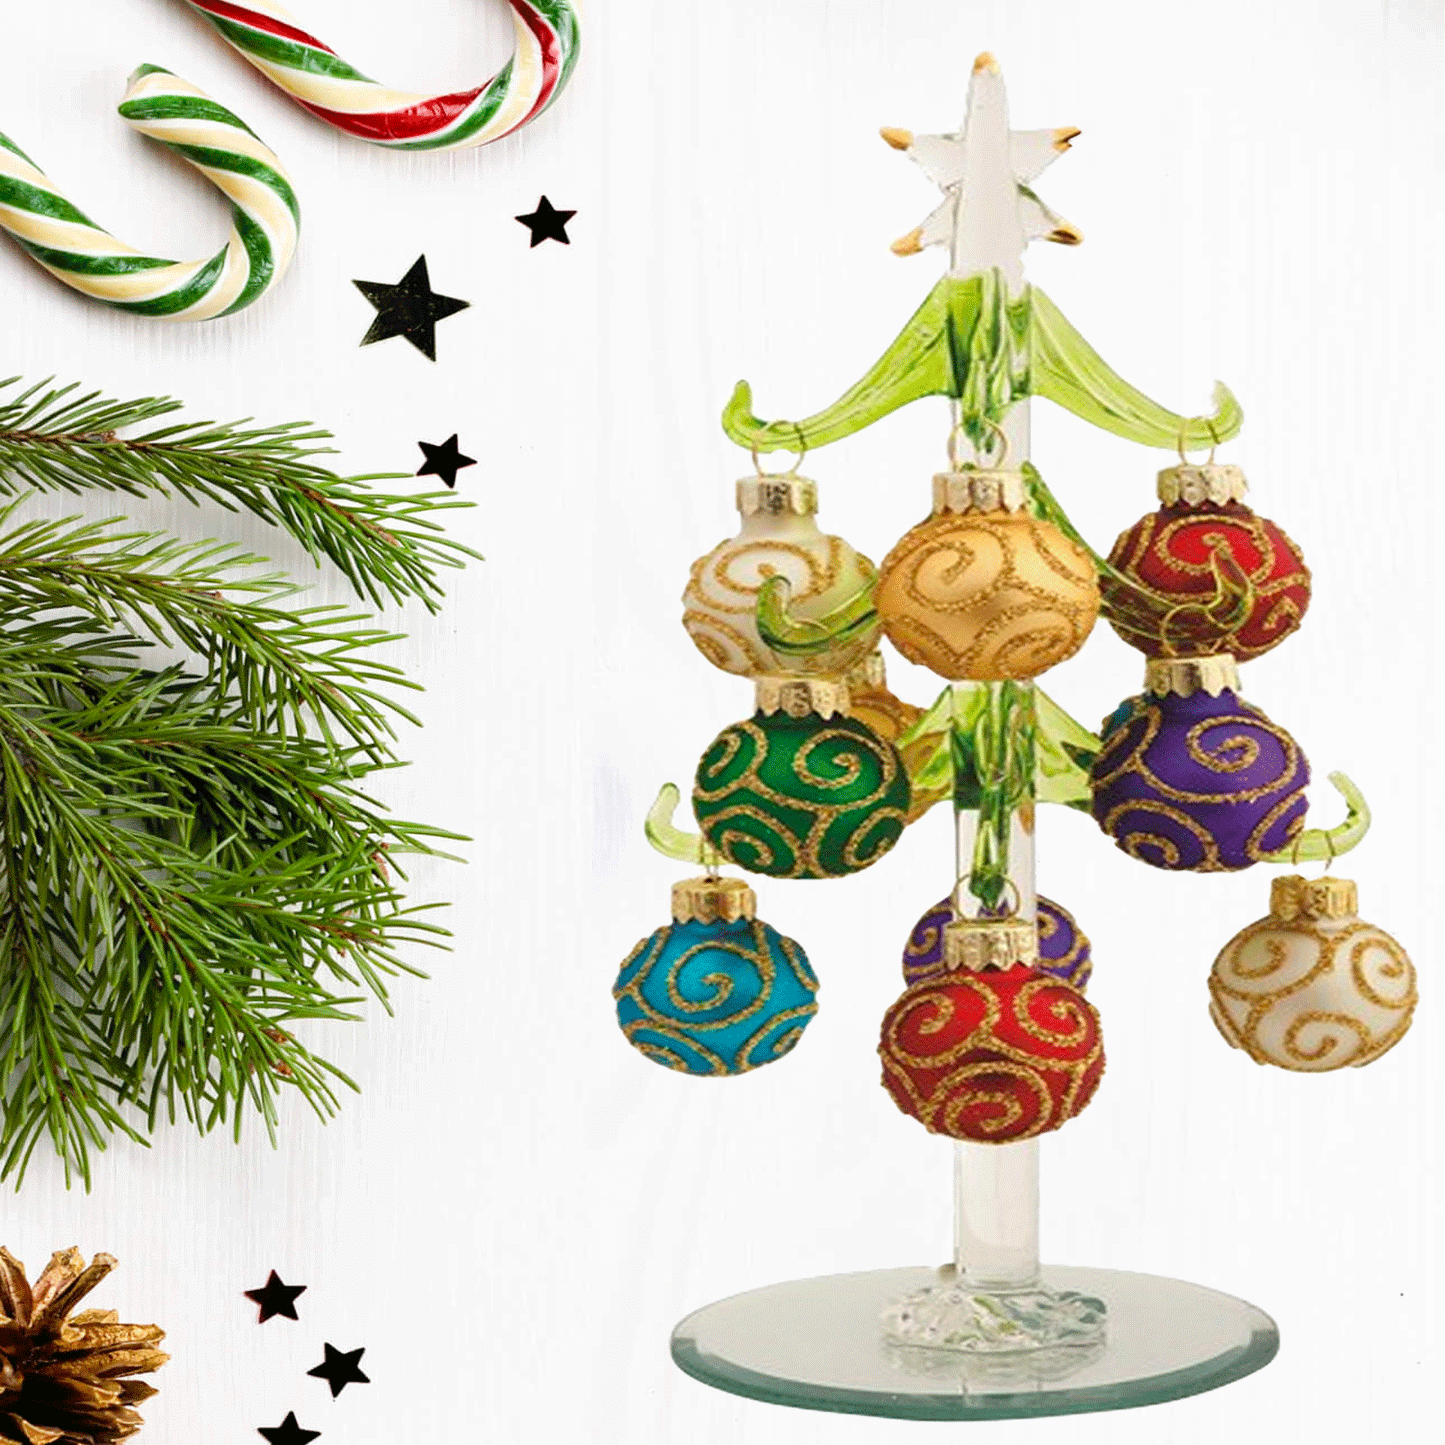 8 inch Glass Tree with 12 Swirl Ornaments